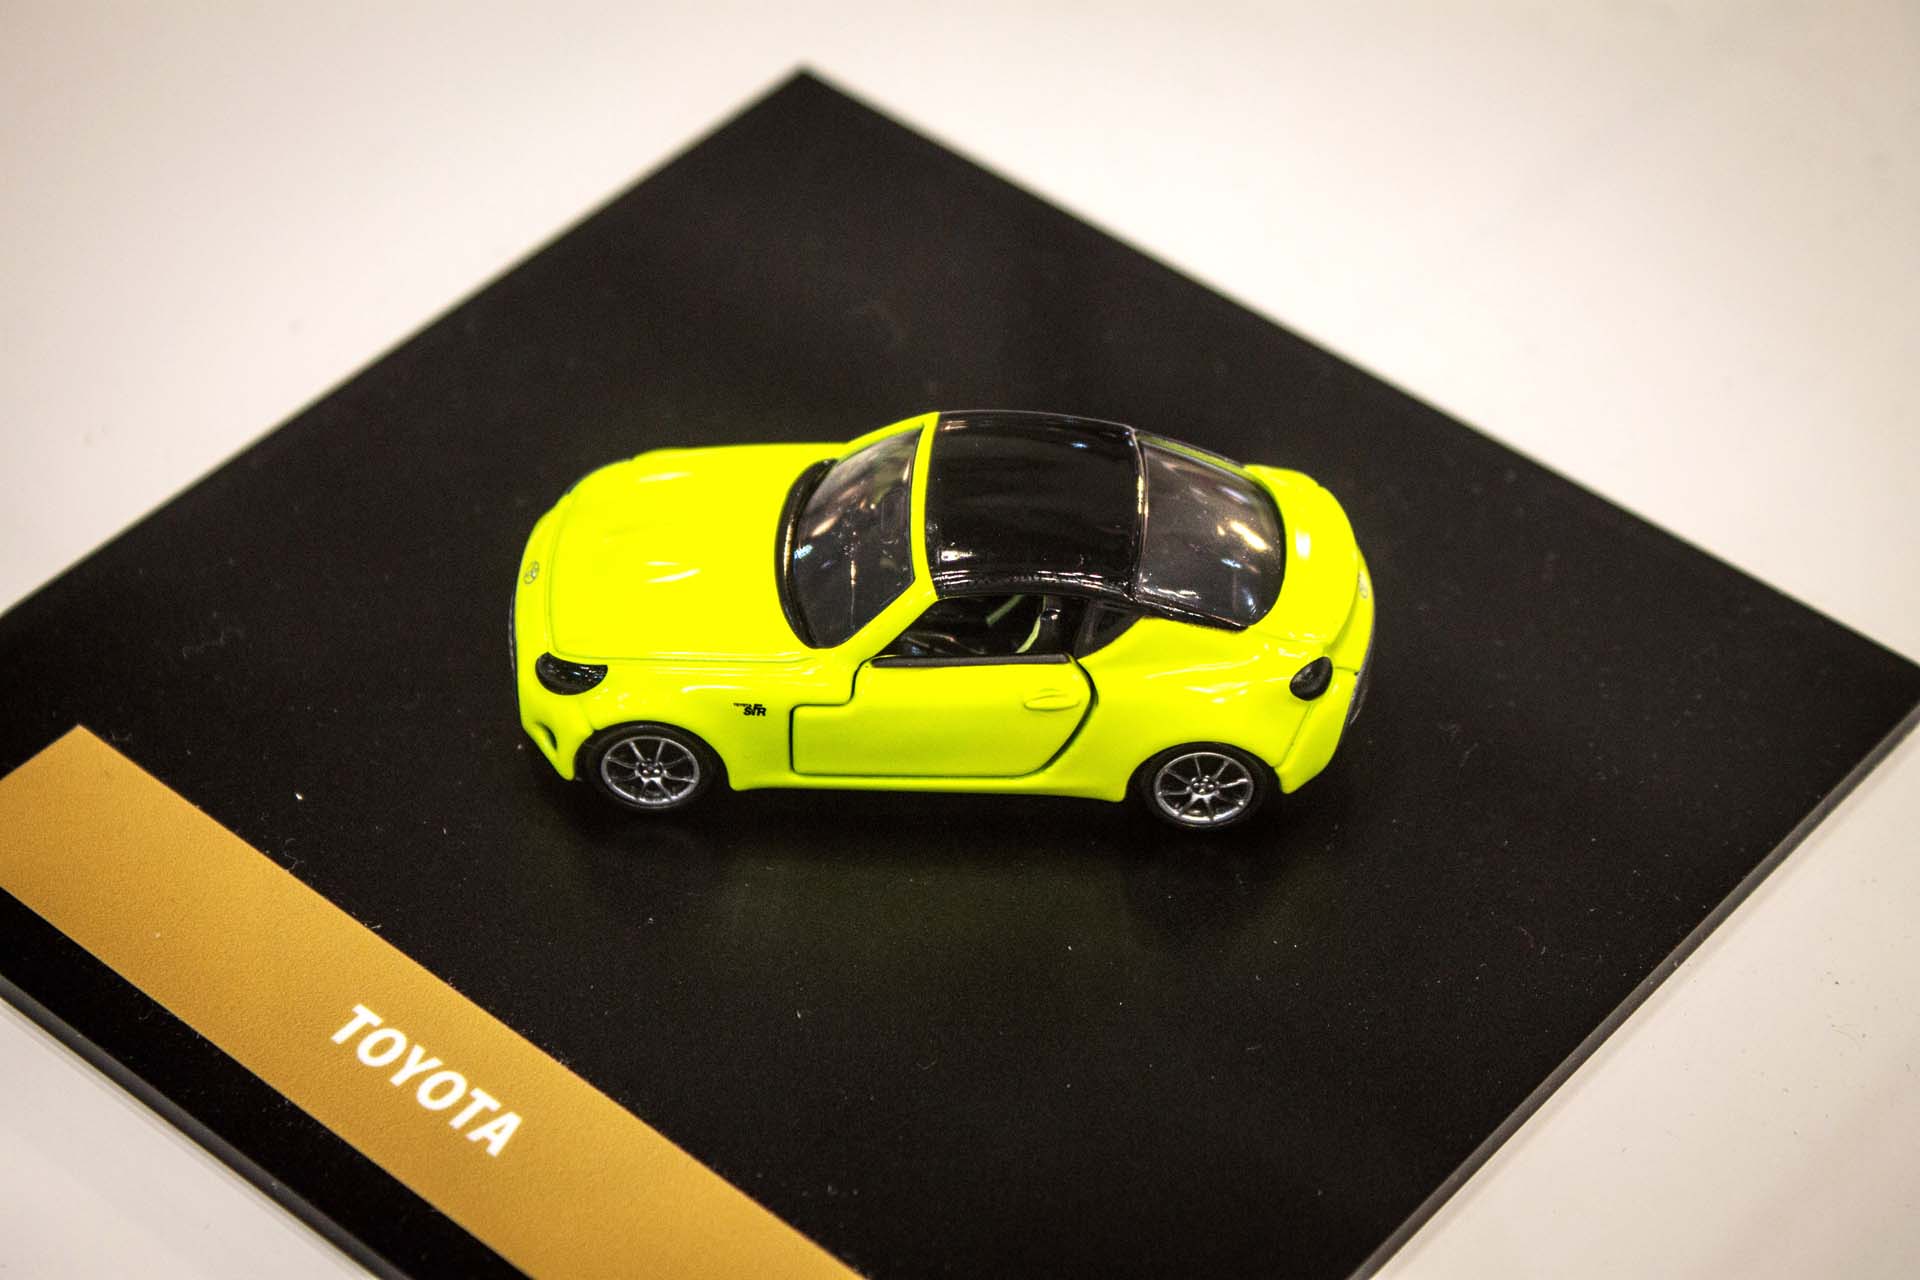 Along with classic and current models, Tomica also makes futuristic and commemorative pieces. This Toyota S-FR sports car concept only just debuted at the show, but you can already get a tiny version of it.